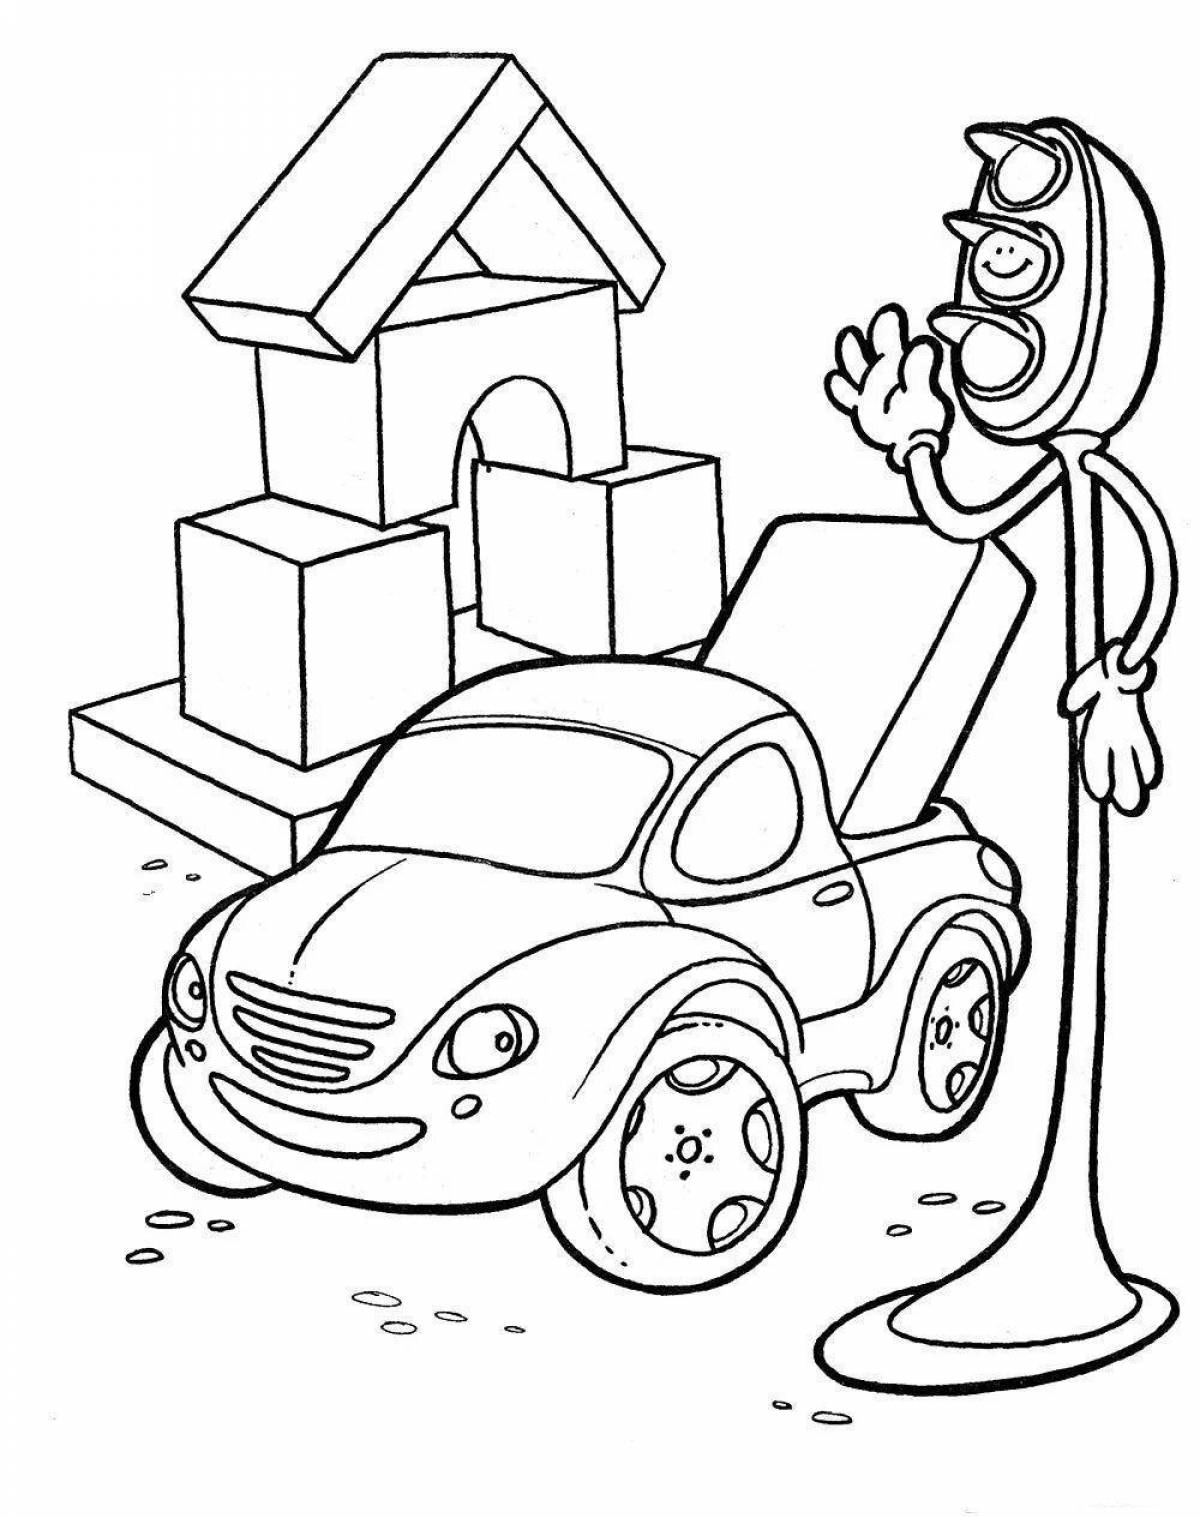 Colorful traffic light coloring page for kids